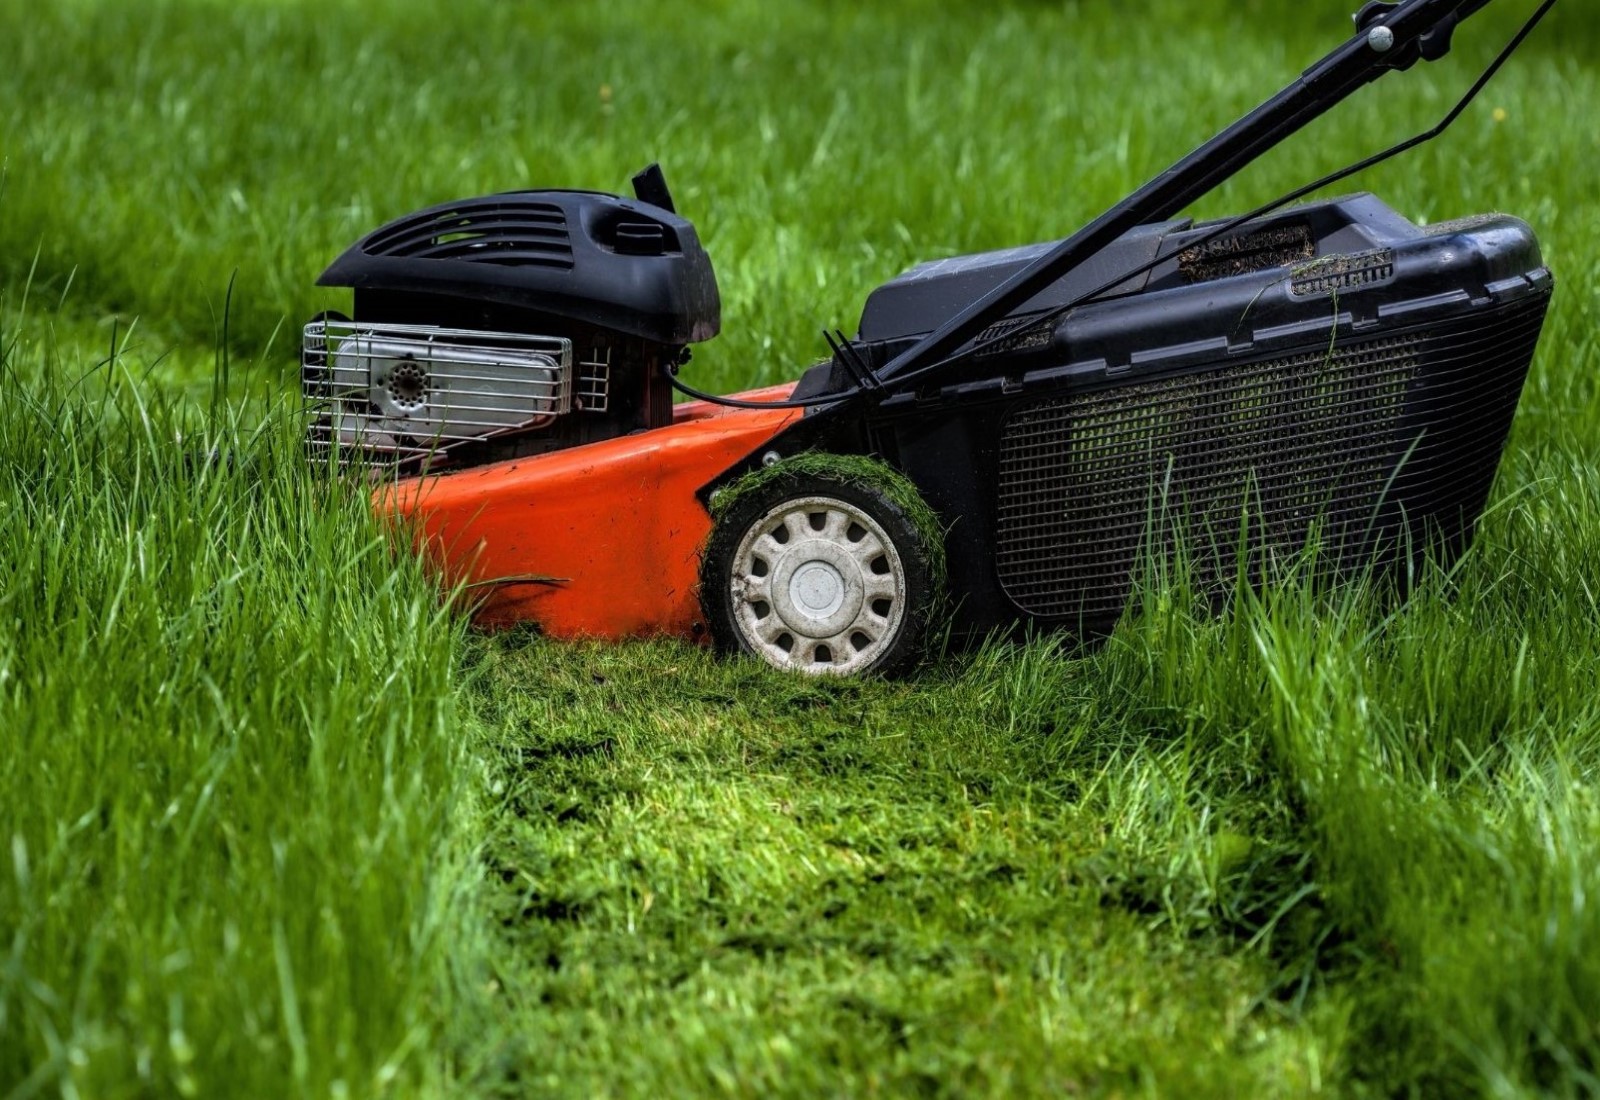 Residential Home Lawncare Lawn Mowing grass Cutting